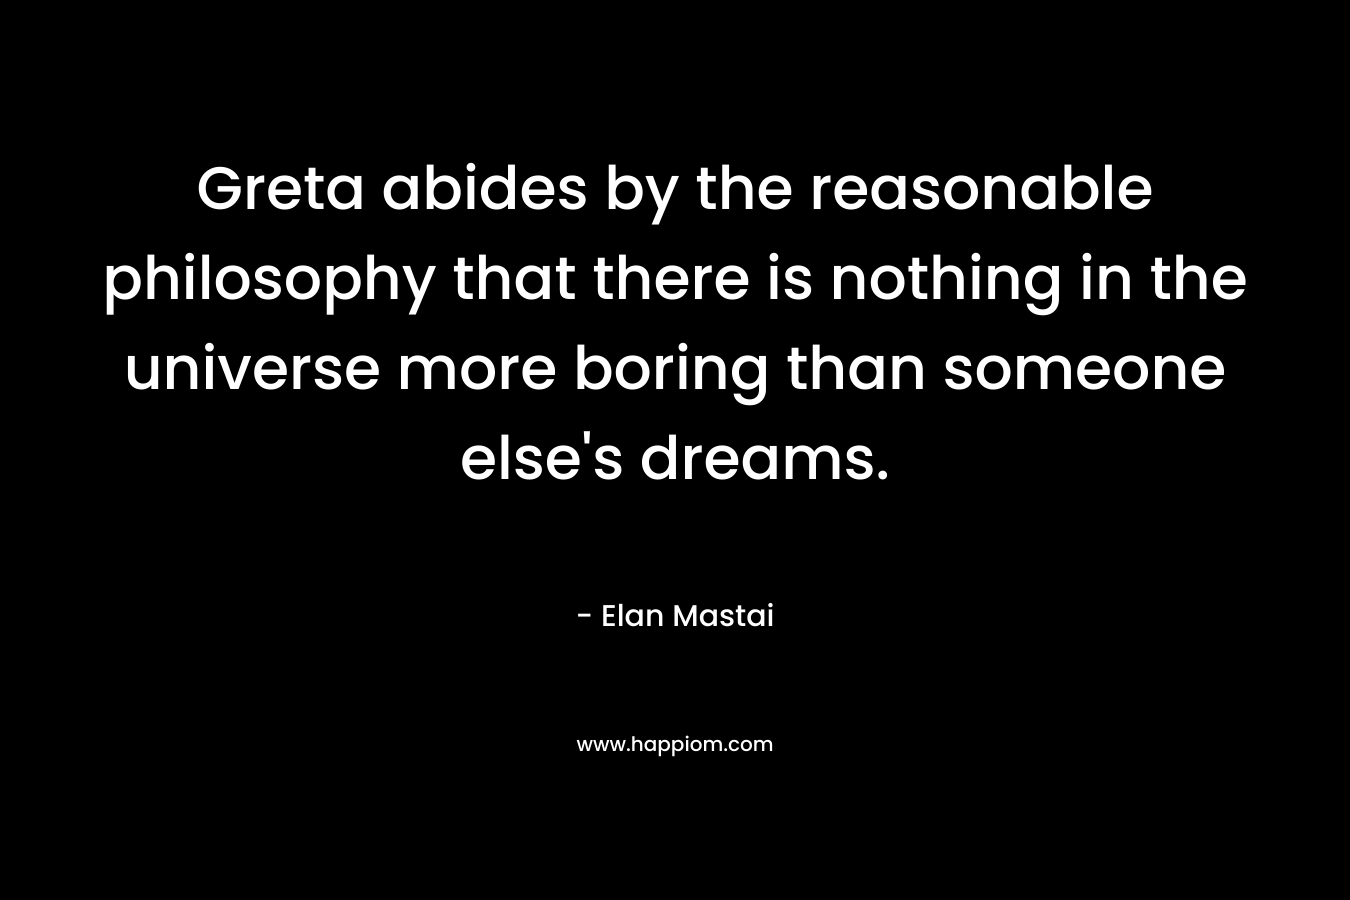 Greta abides by the reasonable philosophy that there is nothing in the universe more boring than someone else's dreams.